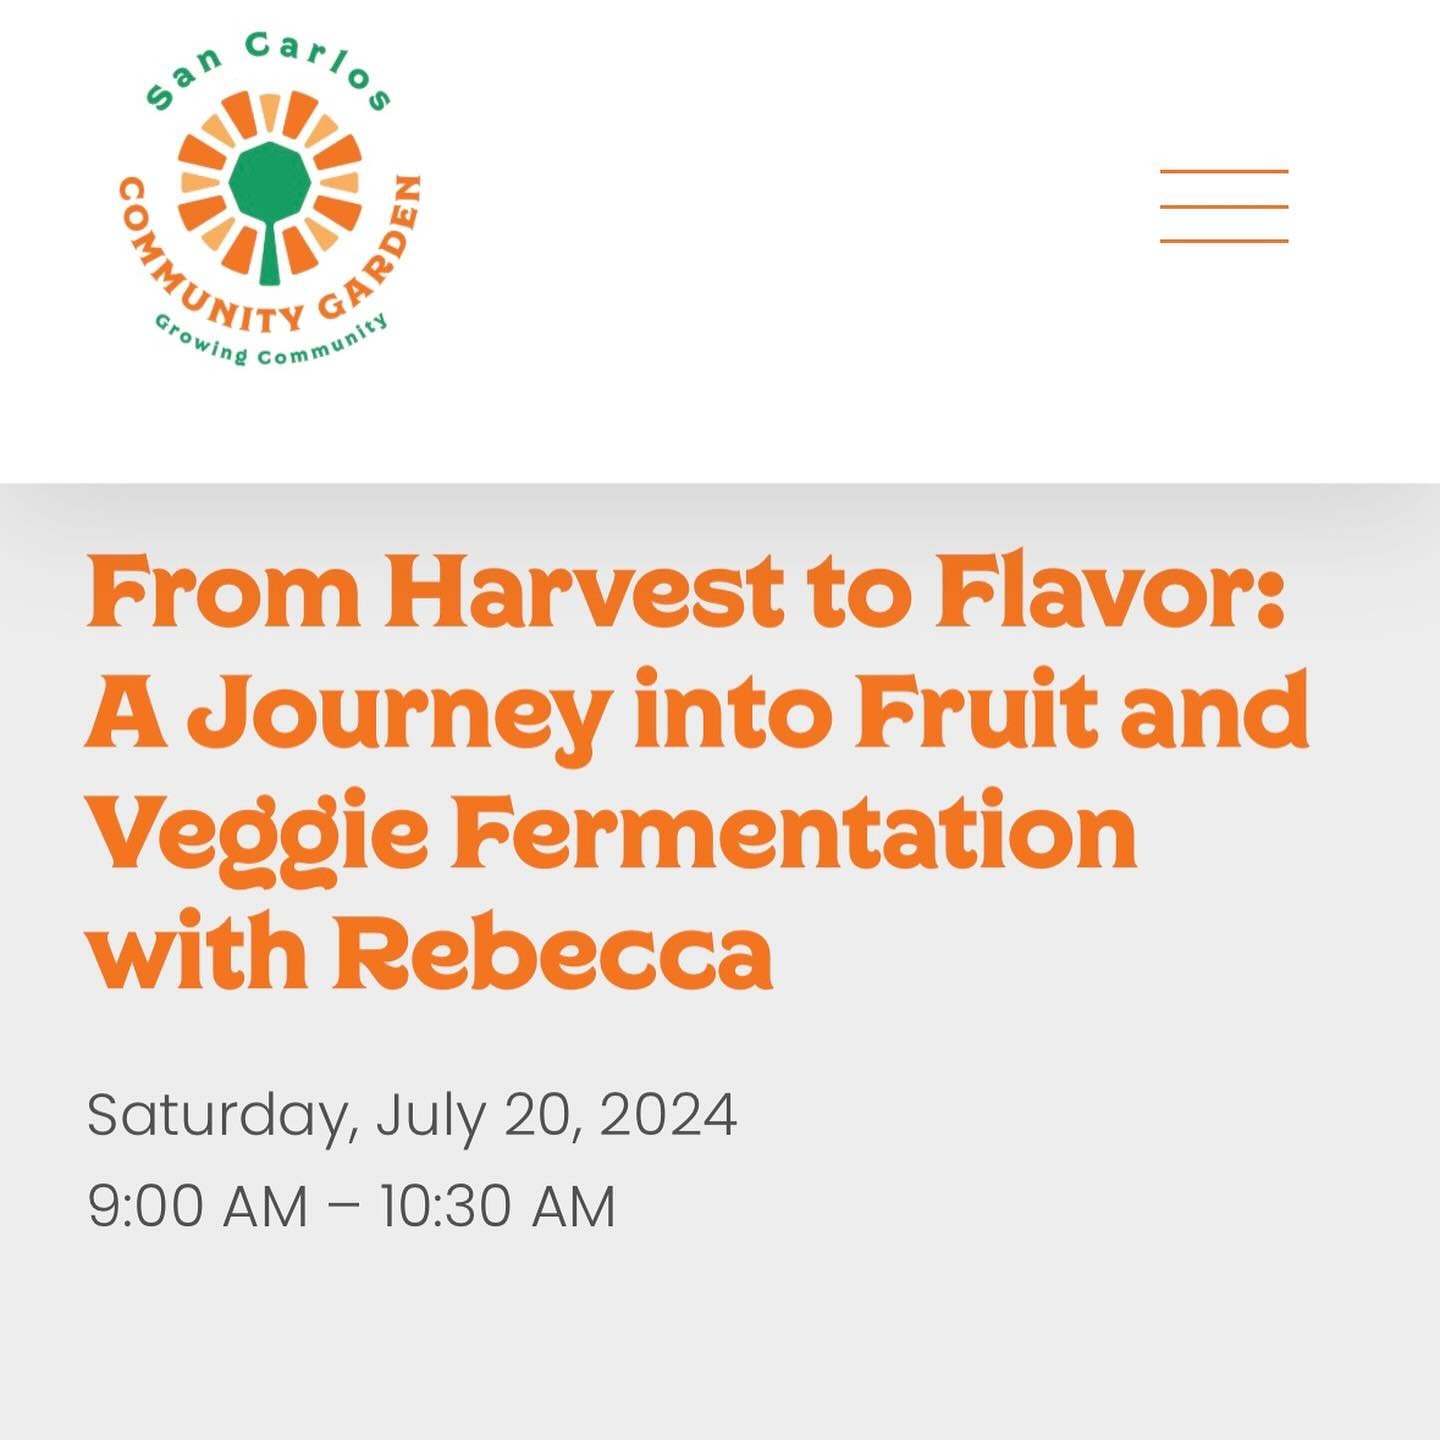 I will be doing a workshop on how to make the most of your summer harvest by fermenting recipes for year long gut health! If you are not a member of San Carlos Community Garden, that&rsquo;s ok! Just pay $10 to attend. 😘🌶️

https://www.sancarloscom